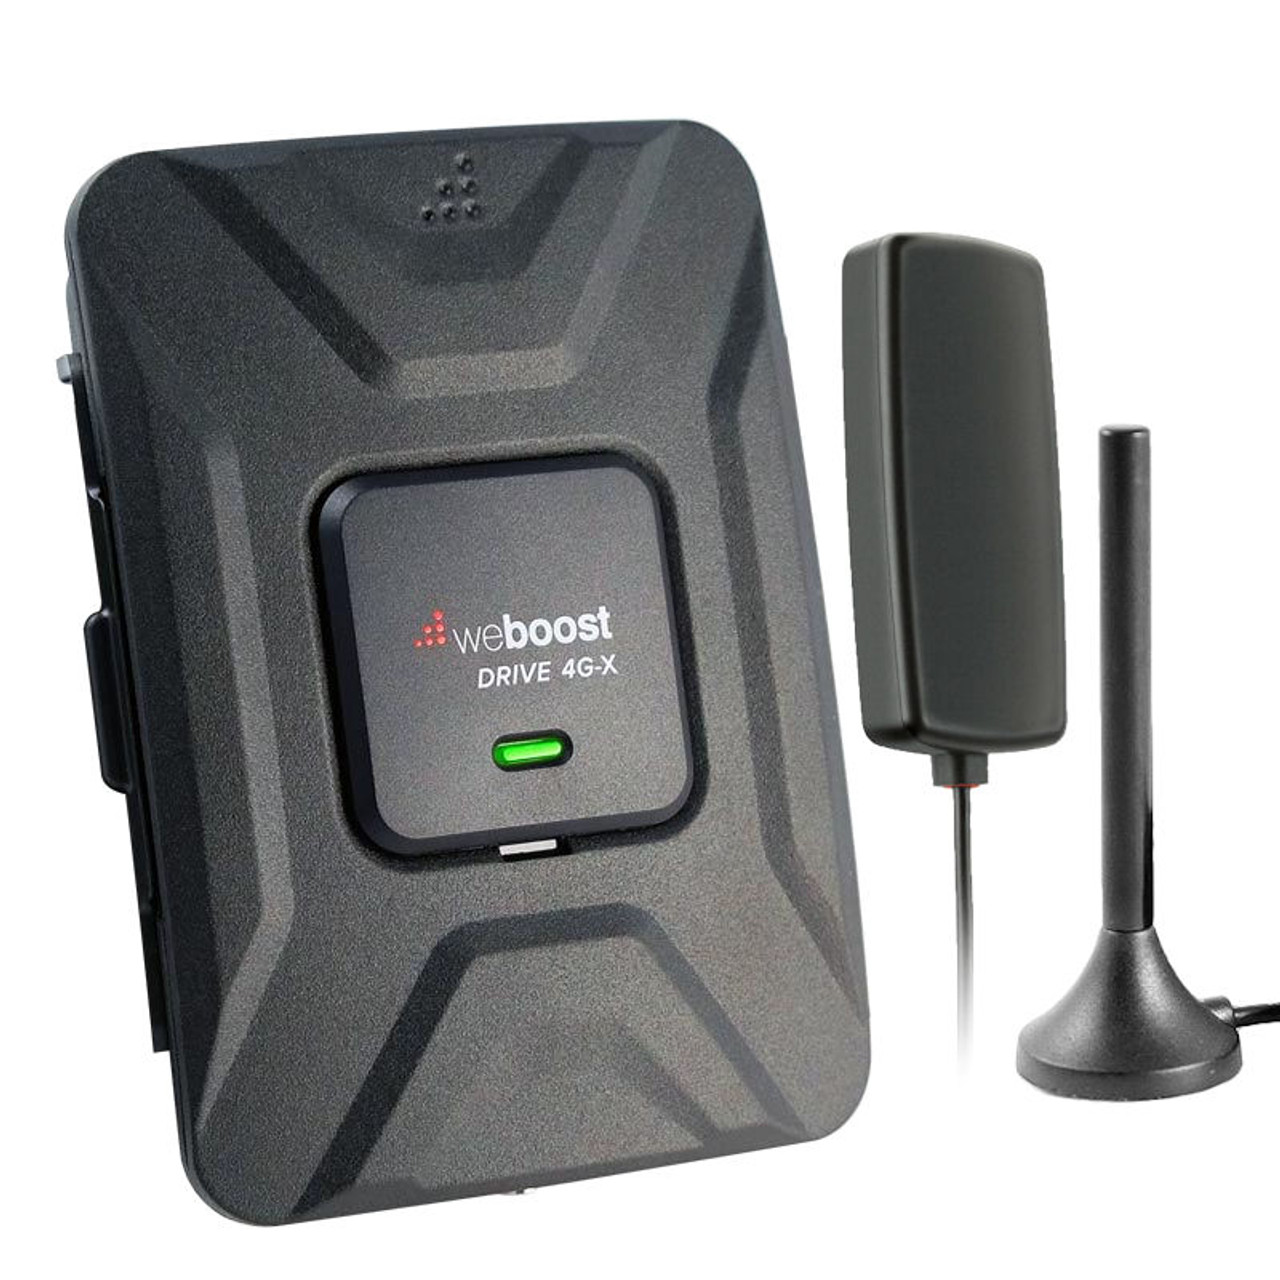 home cell signal booster